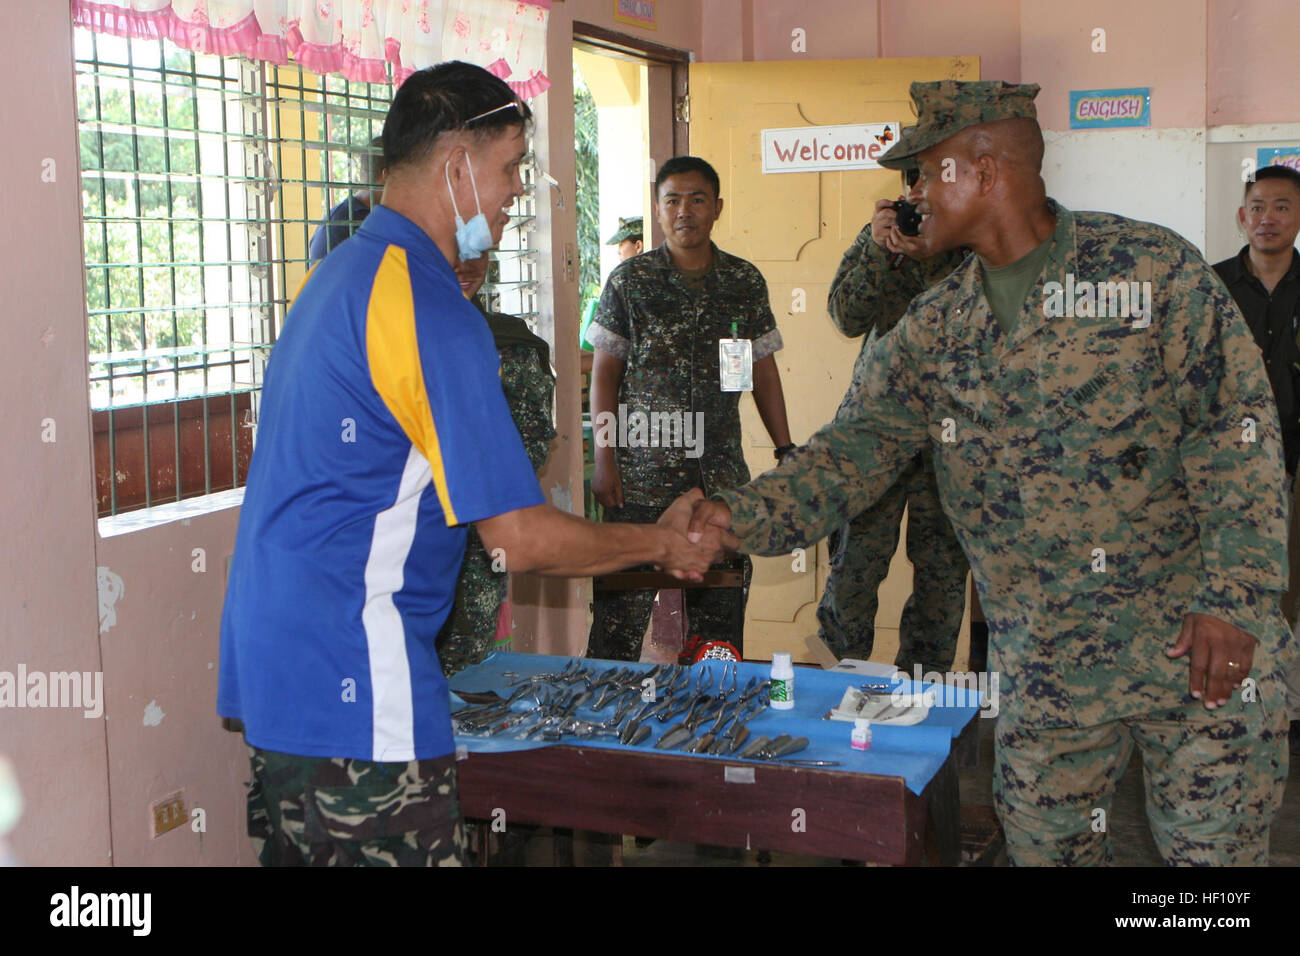 Lt. Col. Renato L. Aguila shakes hands with Brig. Gen. Craig Q. Timberlake Oct. 10 during Philippine Bilateral Amphibious Landing Exercise 2013 on the island of Palawan. PHIBLEX 2013 is a bilateral training exercise hosted annually in the Republic of the Philippines to enhance interoperability and readiness of Armed Forces of the Philippines and U.S. Forces. Service members from the Philippines and the U.S. will spend the duration of PHIBLEX building a pavilion together here at the school as well as providing medical and dental care. Timberlake is the commanding general of the 3rd Marine Exped Stock Photo